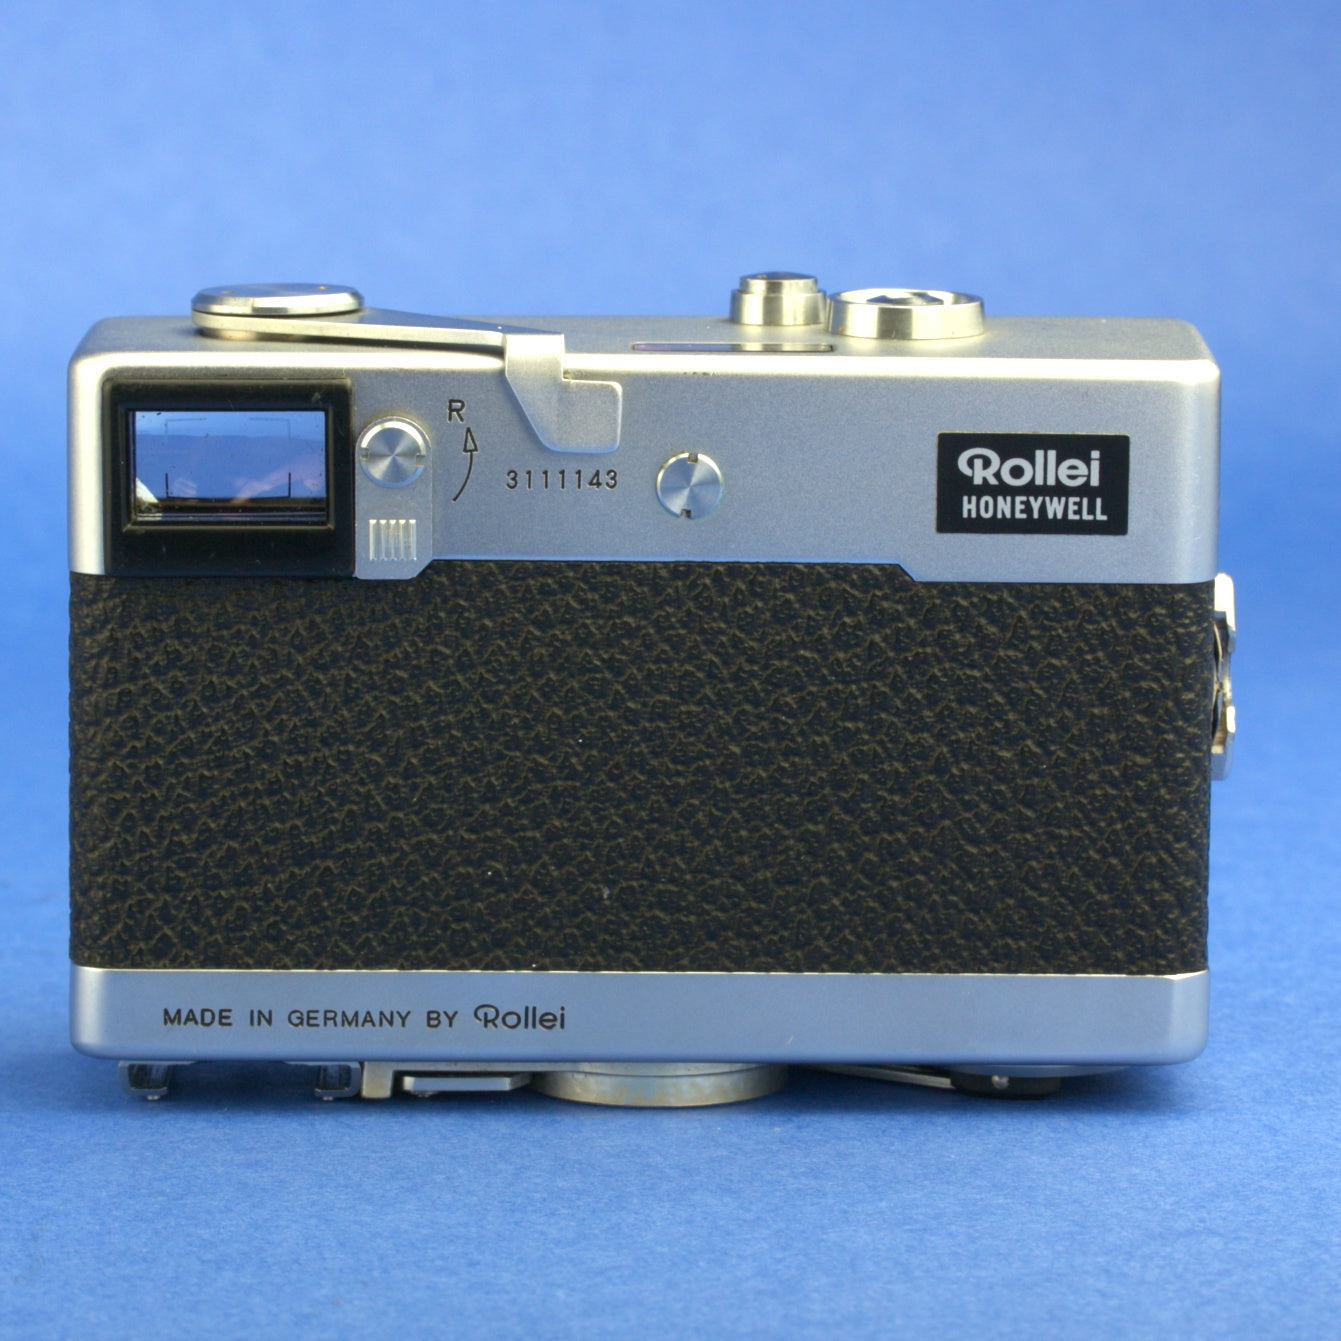 Rollei 35 Film Camera Made in Germany Beautiful Condition